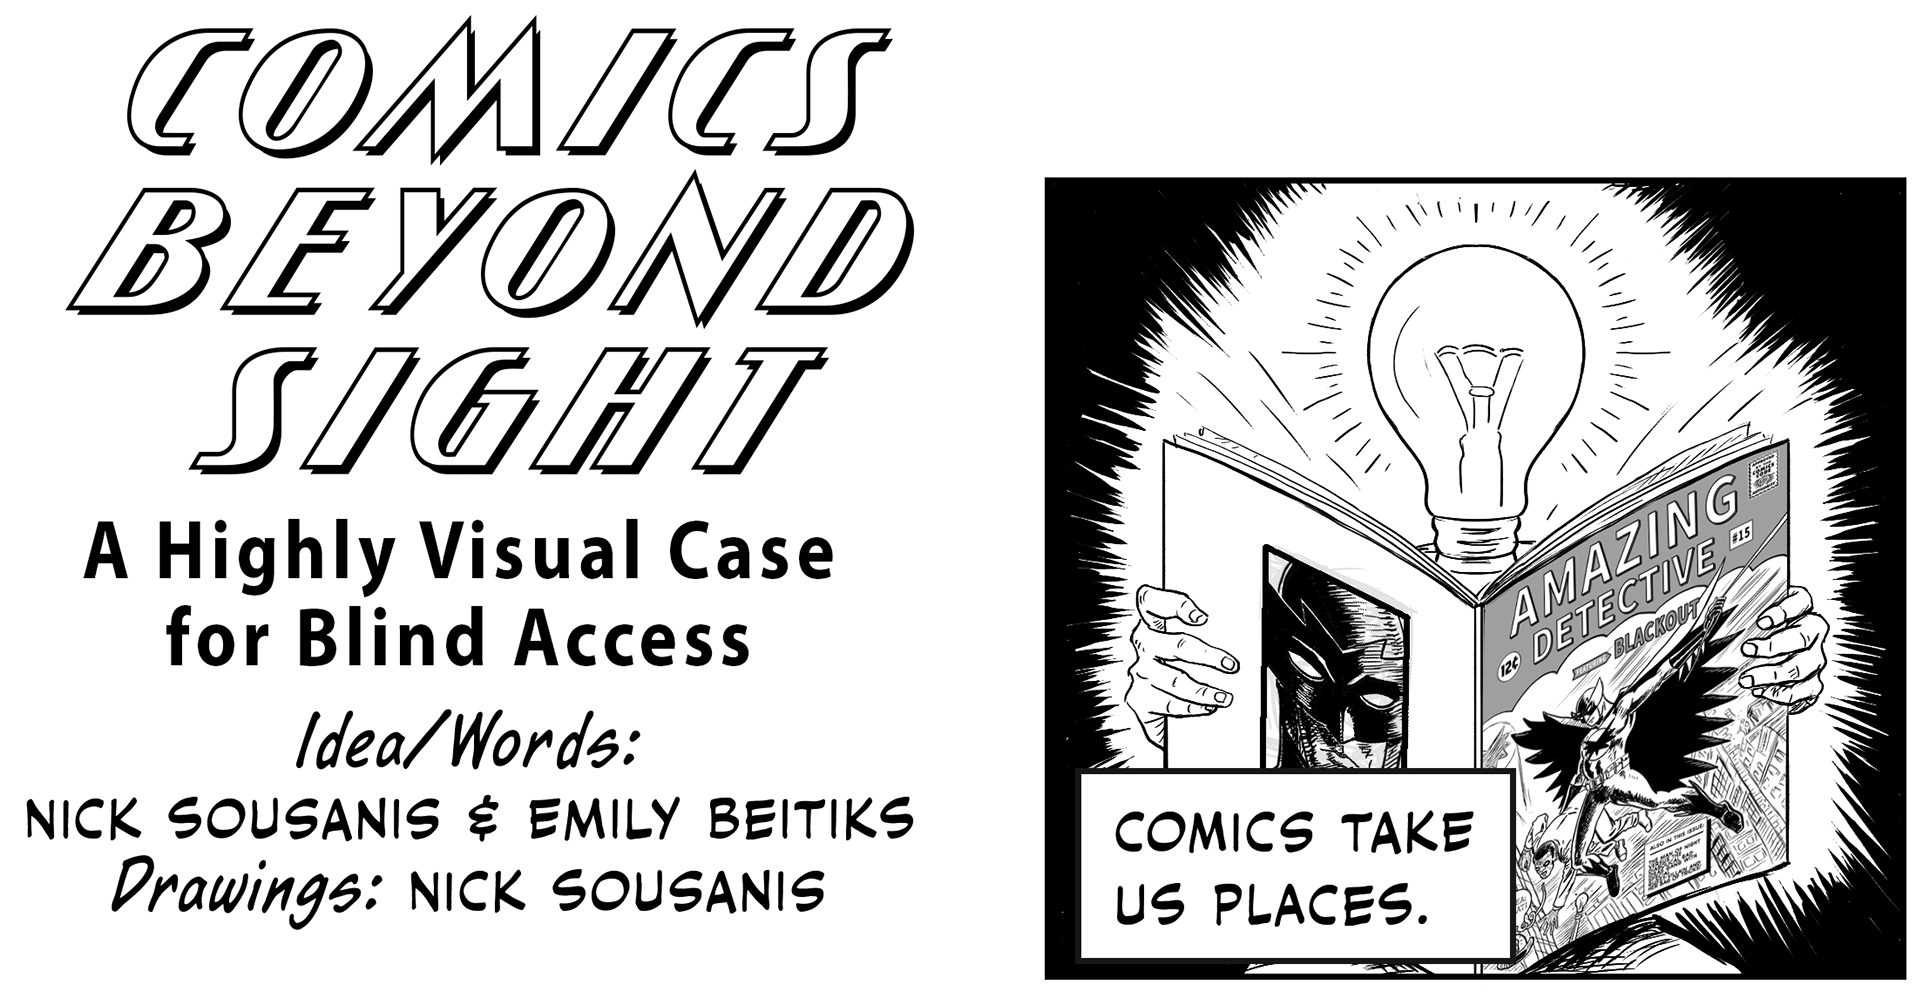 Title panel reads: “Comics Beyond Sight: A Highly Visual Case for Blind Access.” Ideas/words by: Nick Sousanis and Emily Beitiks. Drawings: Nick Sousanis. A brief note before we go further for clarity. Throughout the comic, you will hear repeated references to a fictional comic, titled “Amazing Detective: featuring Blackout.” It will appear throughout our piece, a comic inside a comic, because it allows us to demonstrate the complexity of the comics’ form with a recognizable comics aesthetic.  For example, whenever we are showing strategies for accessing comics non-visually, we demonstrate these modalities in use with images from our superhero Blackout, (who looks suspiciously like Batman) and the cast of the Bad Ideas Gang. The first Bad Ideas member is the leader, Bad Idea, dressed in a dapper suit and bowler hat, he holds a walking stick as his weapon and fashion accessory, a lightbulb attached to the tip. His thought bubbles always match his style, shaped like lightbulbs. Bad Idea also has a henchman, who wears a black mask over his eyes and a lightbulb on his shirt. Most villains have a henchman like this - not much personality, just a body for Bad Idea to boss around. Lastly, we have Felixa, dressed as a wide-eyed catwoman who attacks with accessories she carries in her carpet-bag purse. She’s modeled on Felix the Cat, an animated cartoon from the silent film era, who is credited with the visual icon of a lightbulb over the head to signal the concept of a good idea. This theme of lightbulbs carries throughout the piece. Now onto the comic! Panel 1 Caption: “Comics take us places.” A figure with the head of a lightbulb and two human hands holds a comic book, its bulb brightening the surrounding area while taking in the newest issue of “Amazing Detective: featuring Blackout.” 